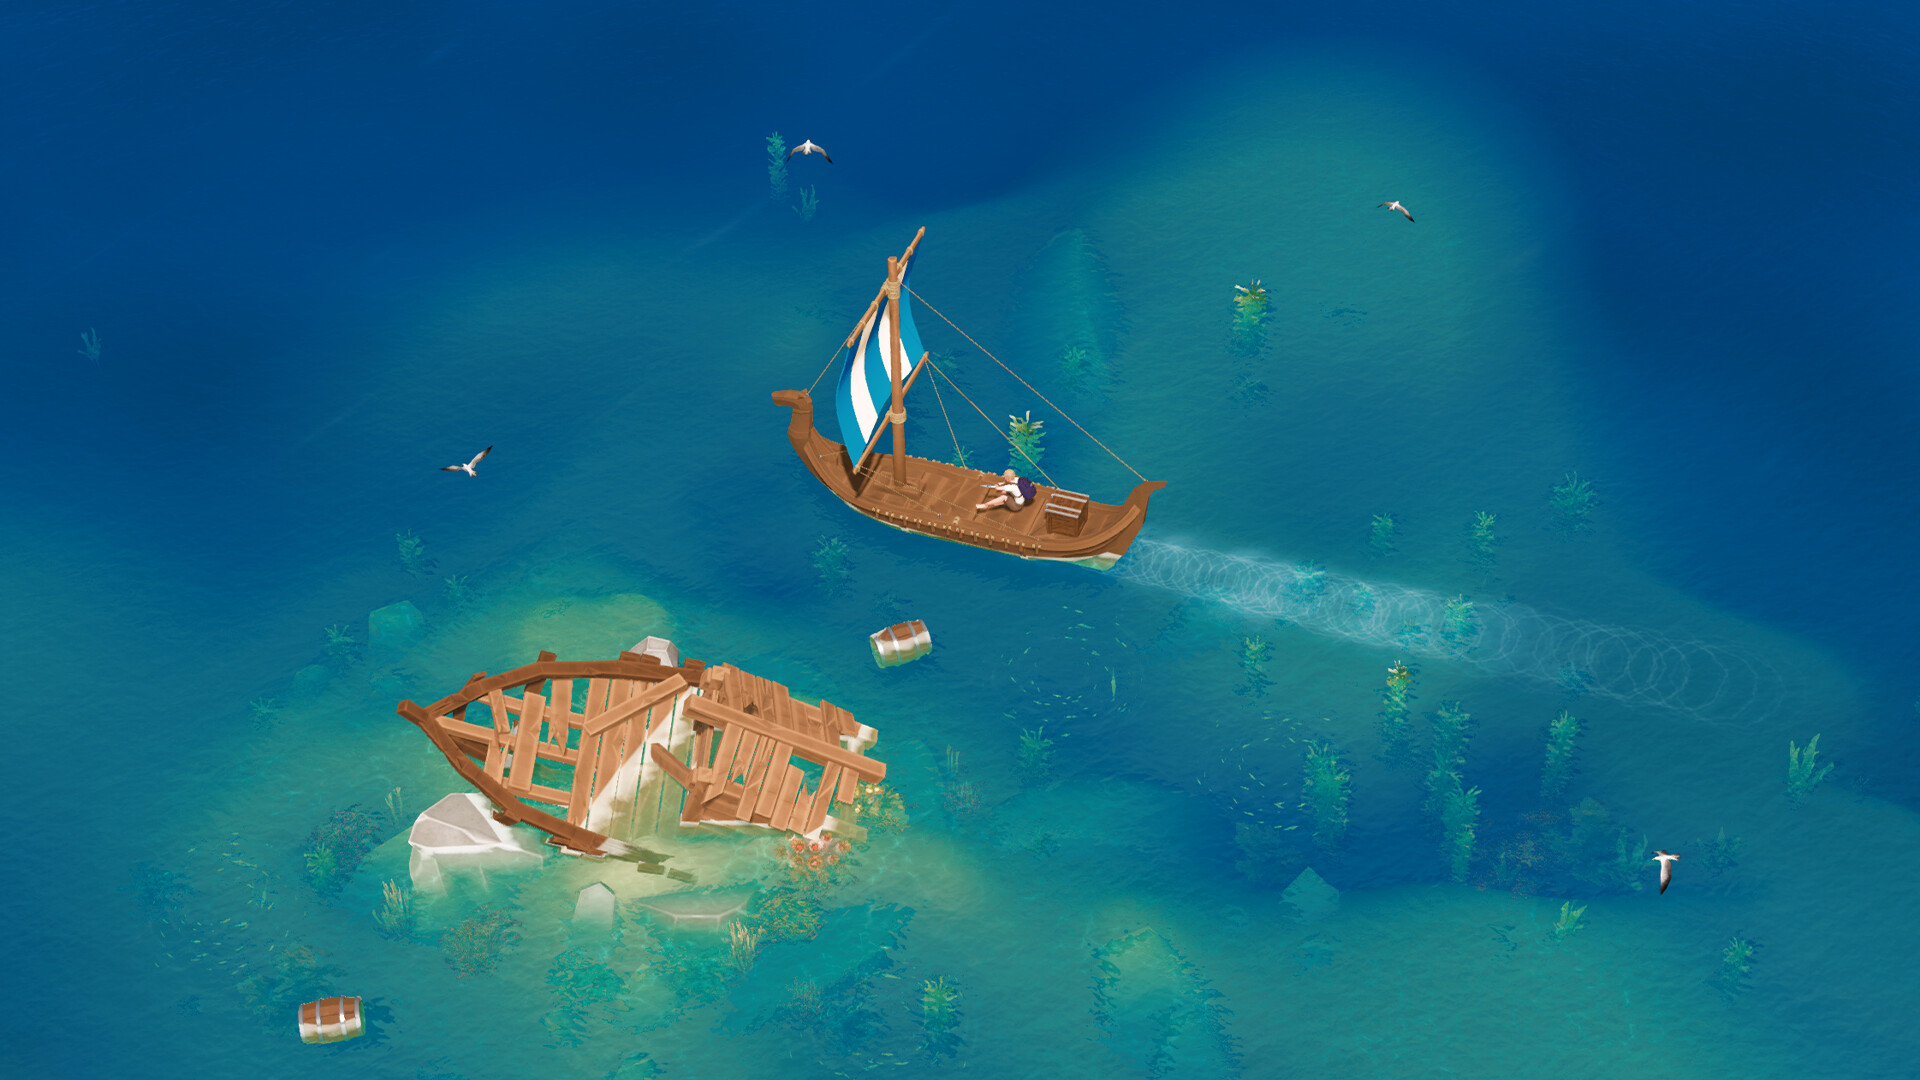 Sailing past a wreck in Len's Island